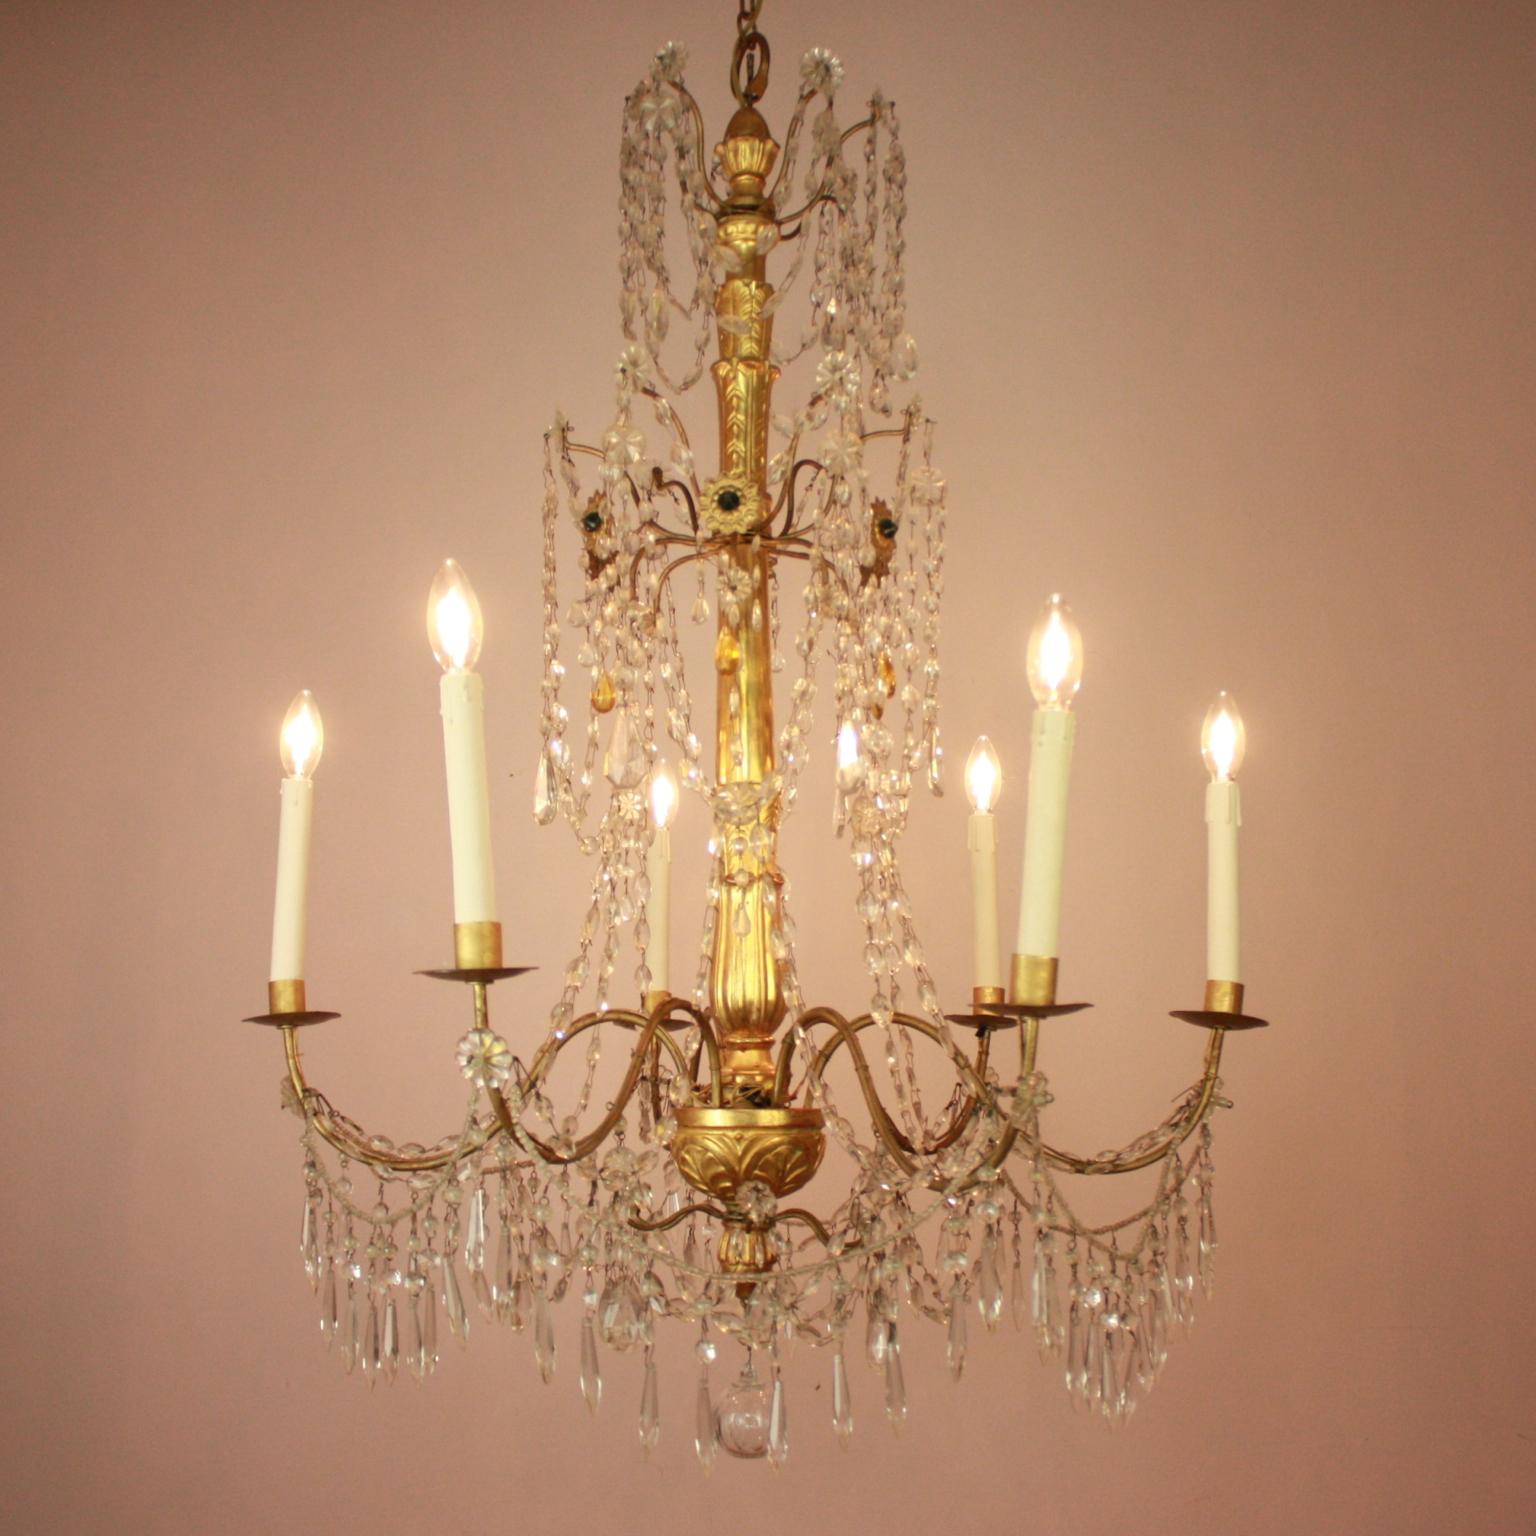 Pair of Late 18th Century Neoclassical Genoa/Italy Giltwood Crystal Chandeliers 4